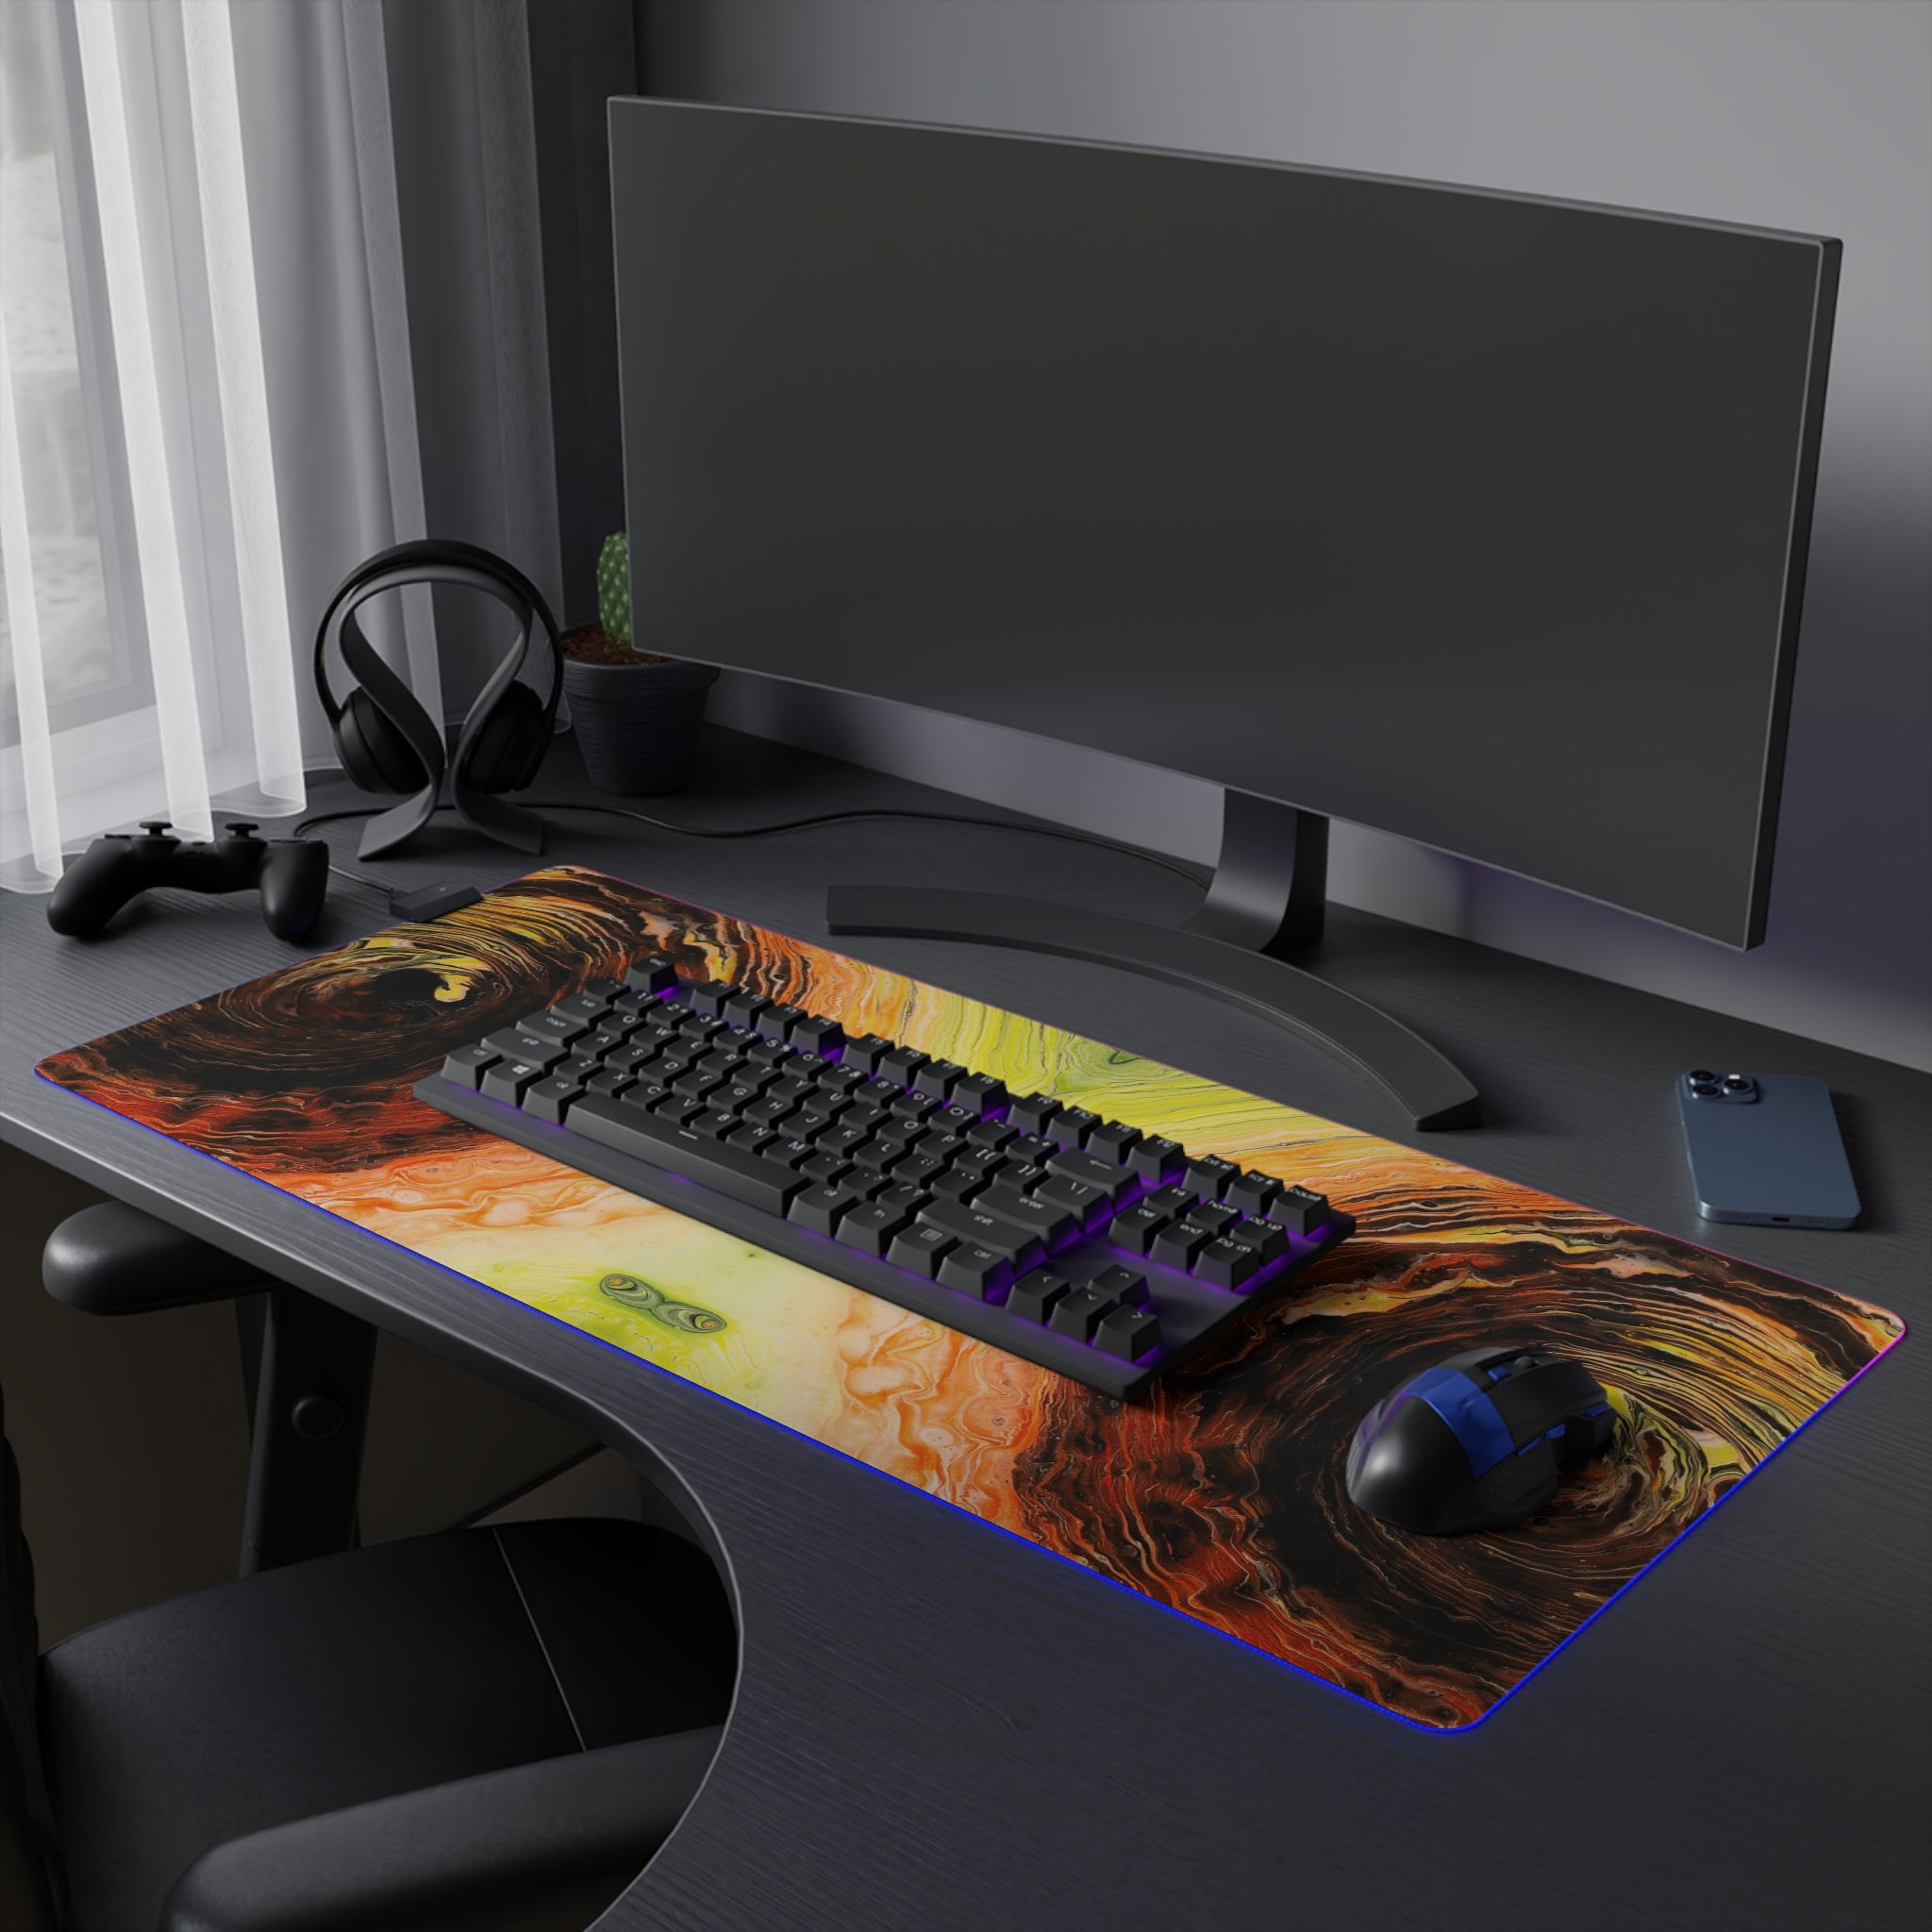 Tunnel Vision - LED Gaming Mouse Pad